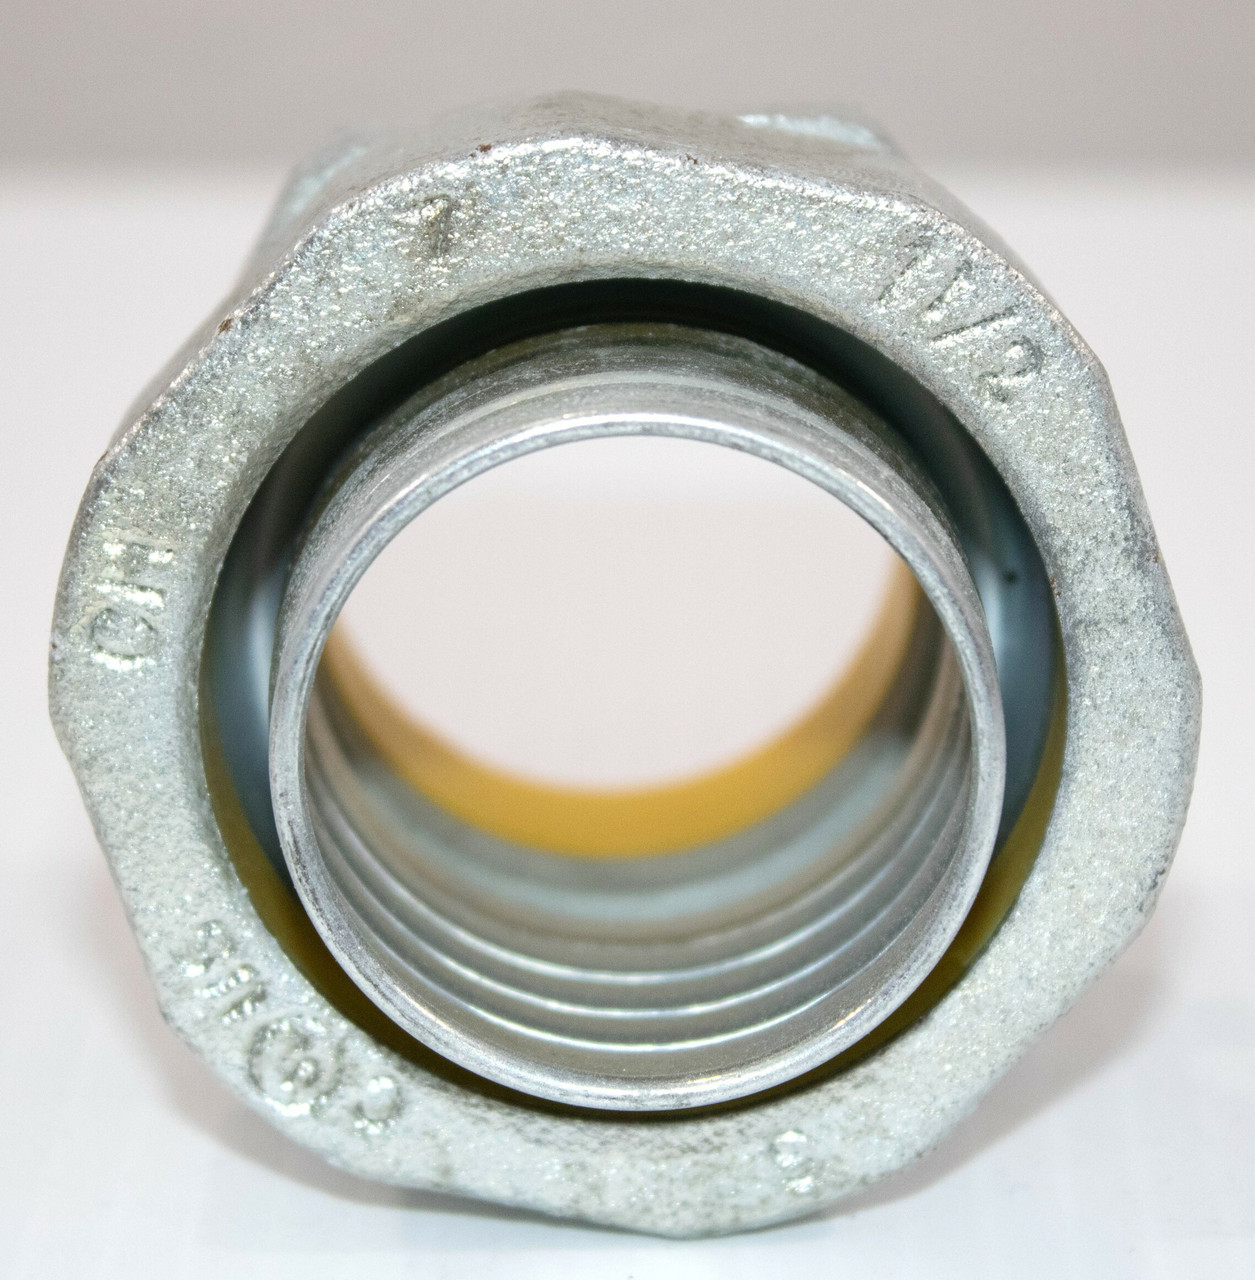 Eaton Crouse Hinds LTB150 Straight Male Connector with Insulated Throat Bushing Liquidator Liquidtight 1-1/2 in